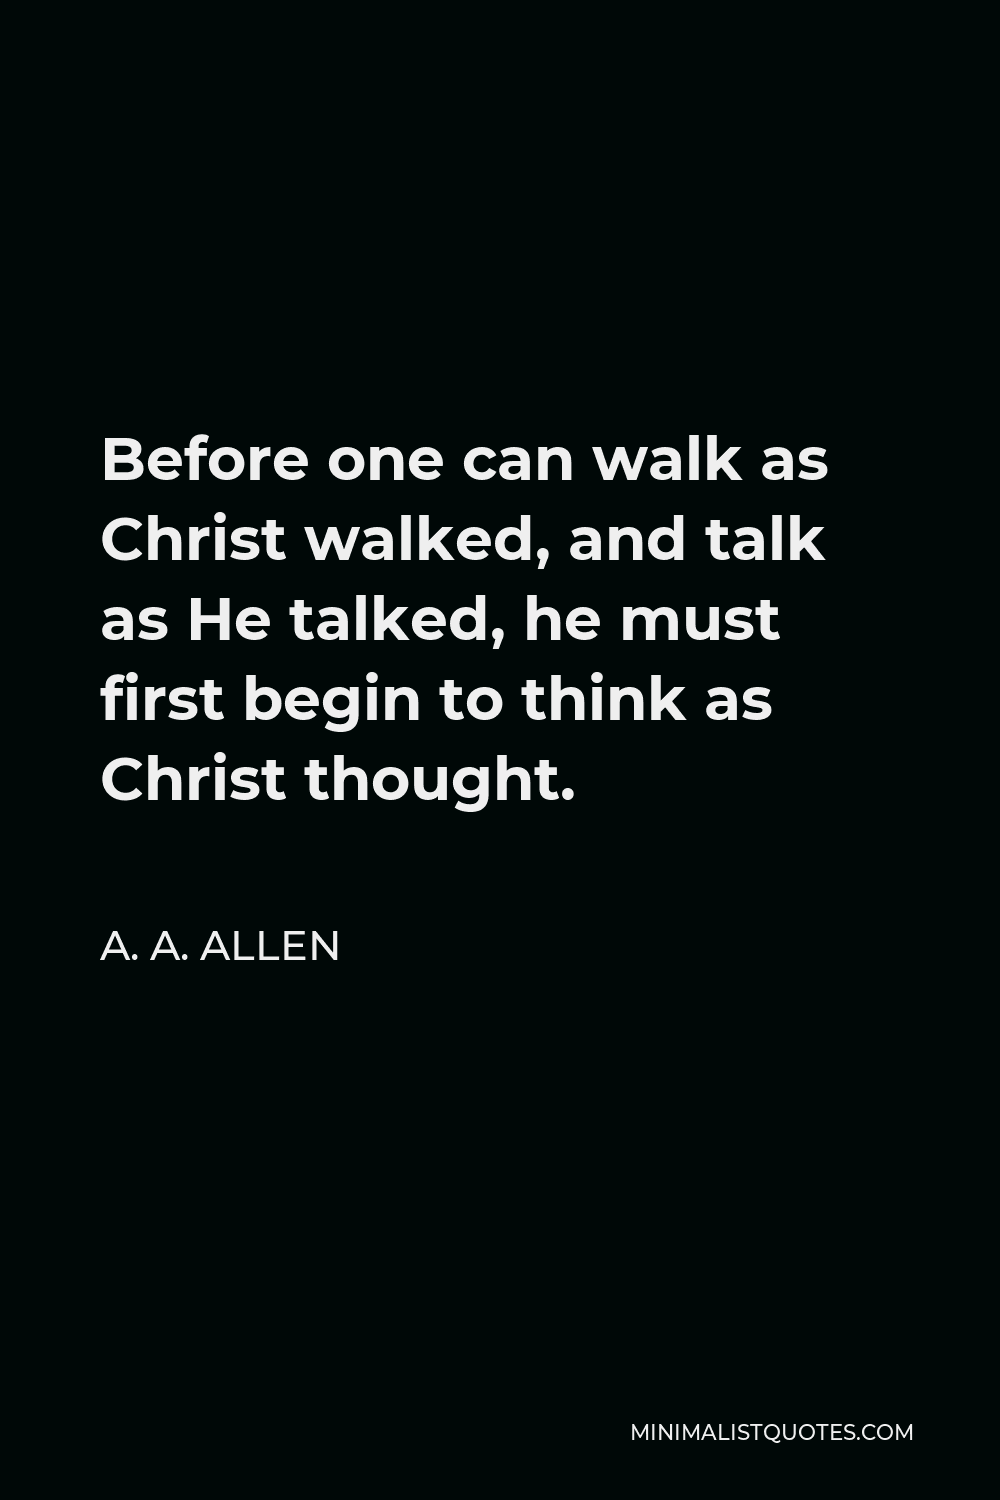 A. A. Allen Quote - Before one can walk as Christ walked, and talk as He talked, he must first begin to think as Christ thought.